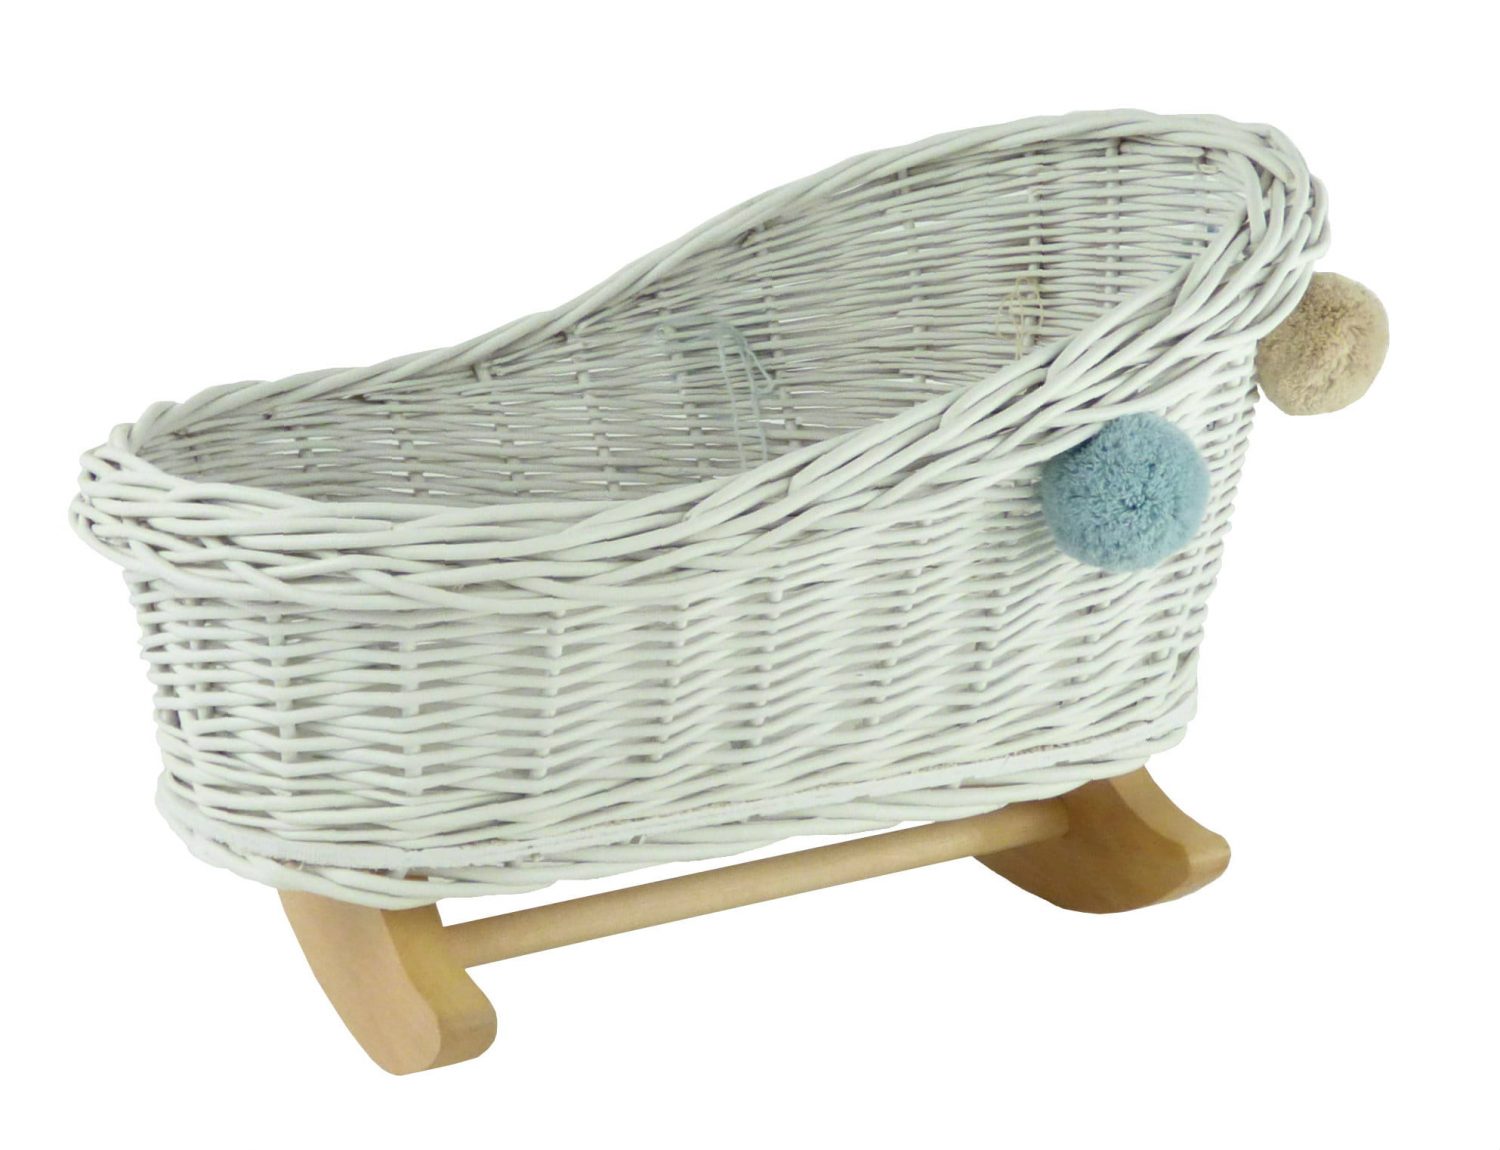 Wicker CRADLE FOR DOLLS WITH POMPOMS - WOOD